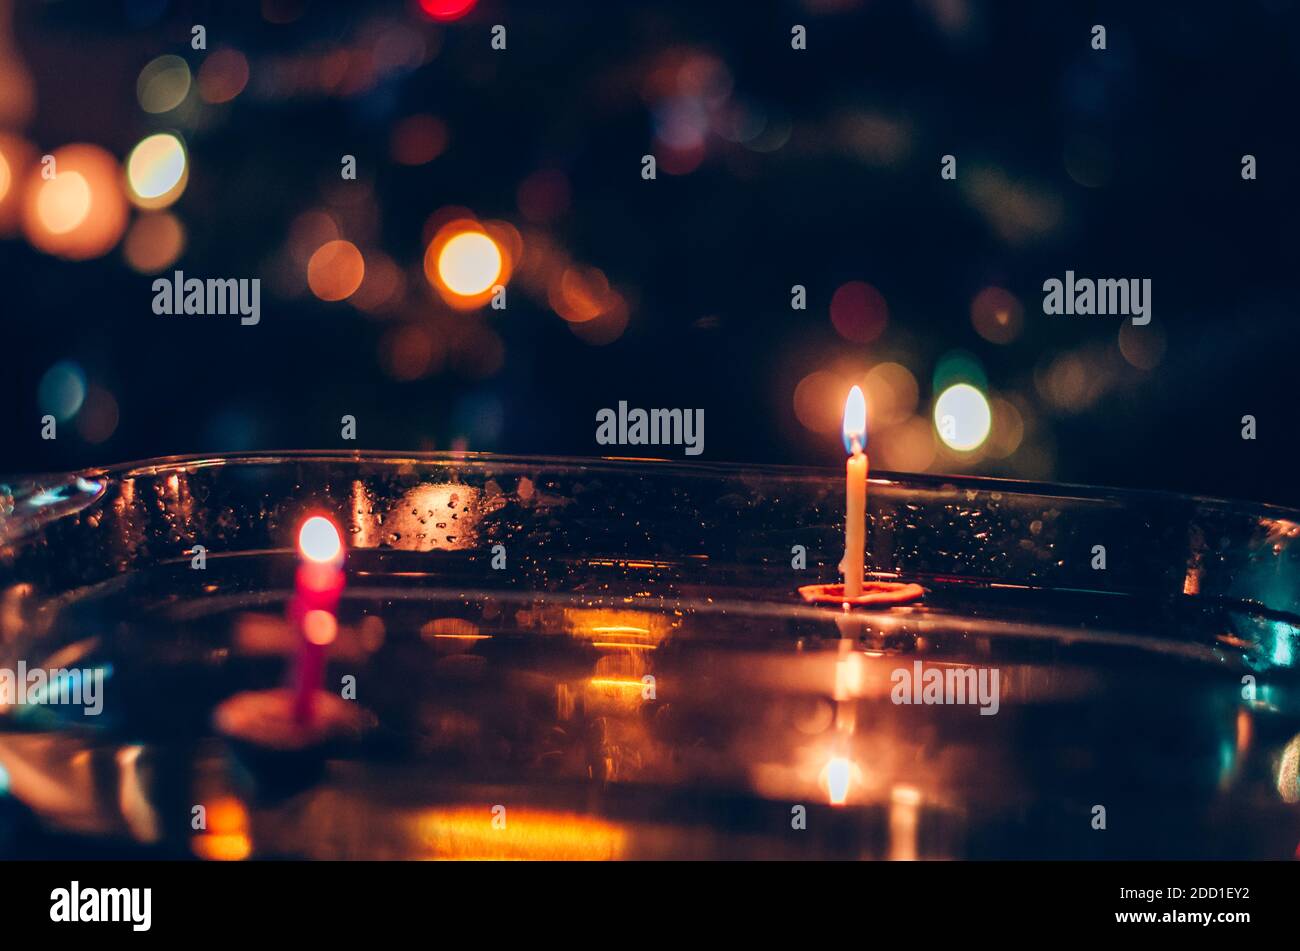 christmas tradition of nut shells floating on water surface, eastern Europe tradition Stock Photo